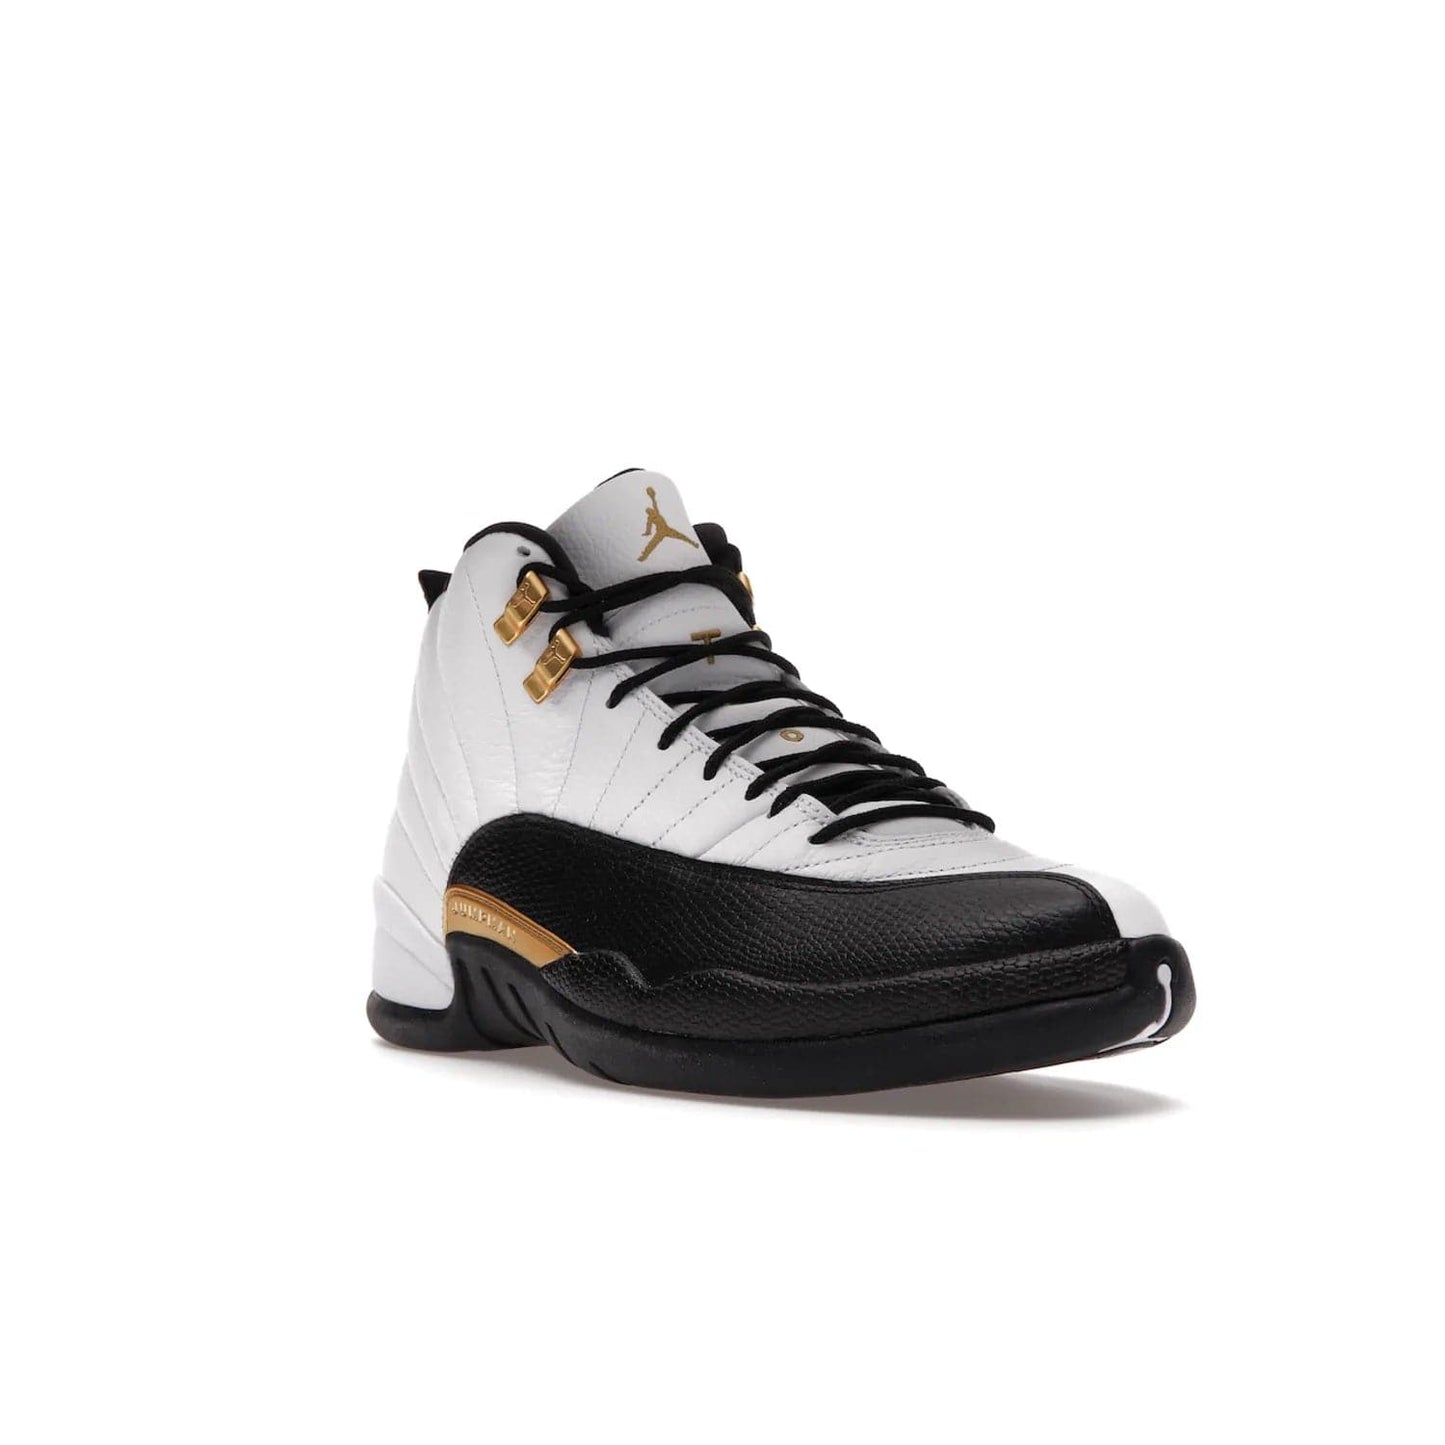 Jordan 12 Retro Royalty Taxi - Image 6 - Only at www.BallersClubKickz.com - Make a statement with the Air Jordan 12 Retro Royalty Taxi. Woven heel tag, gold plaquet, white tumbled leather upper plus a black toe wrap, make this modern take on the classic a must-have. Available in November 2021.